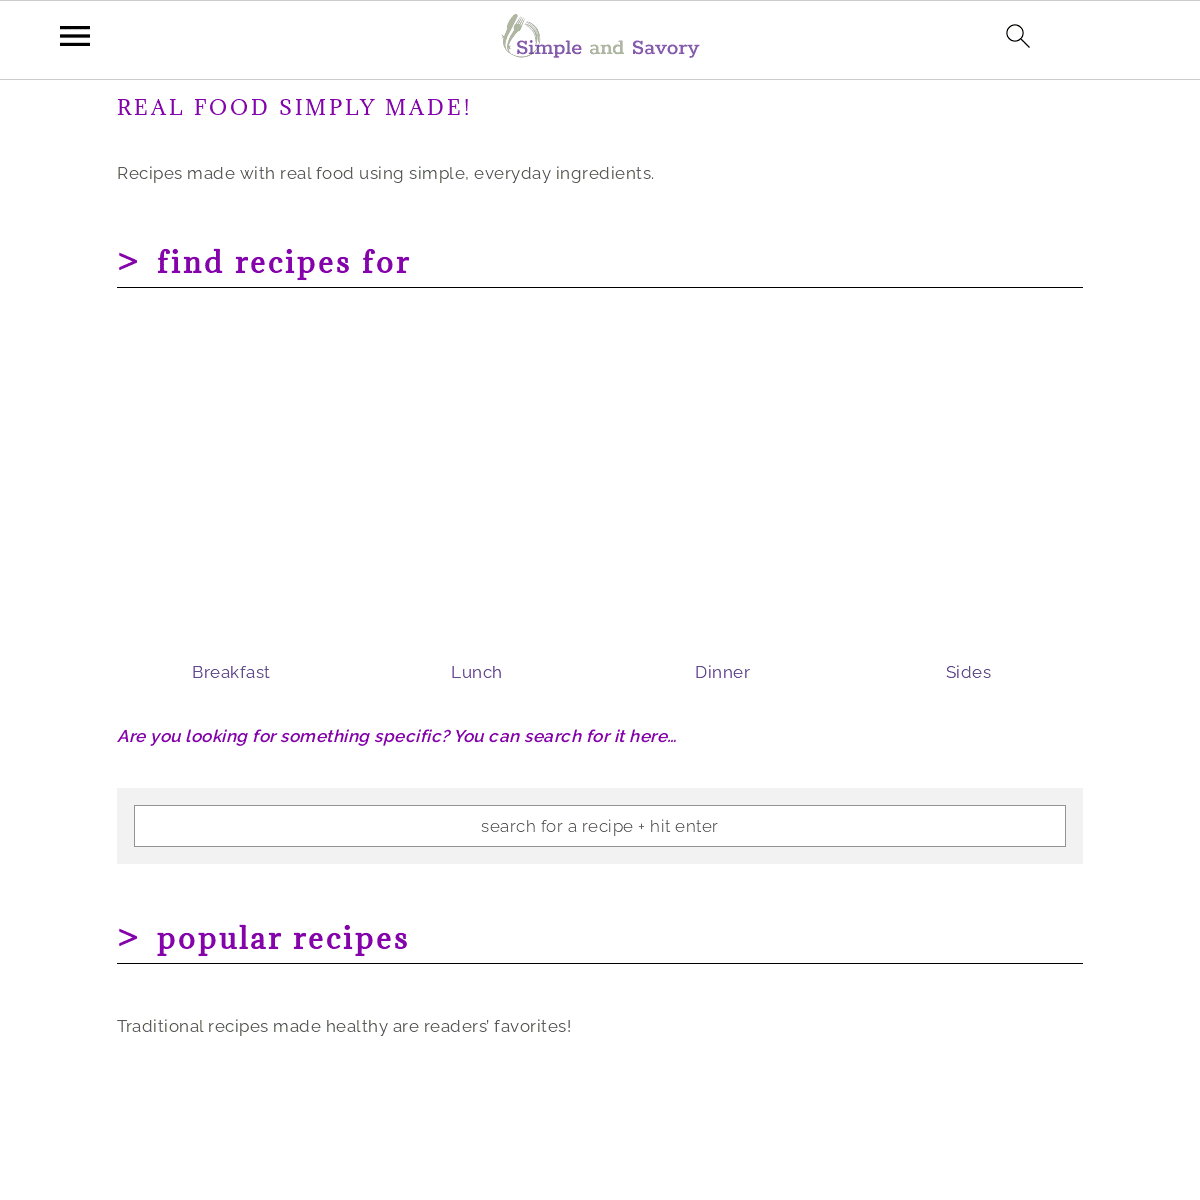 A complete backup of https://simpleandsavory.com